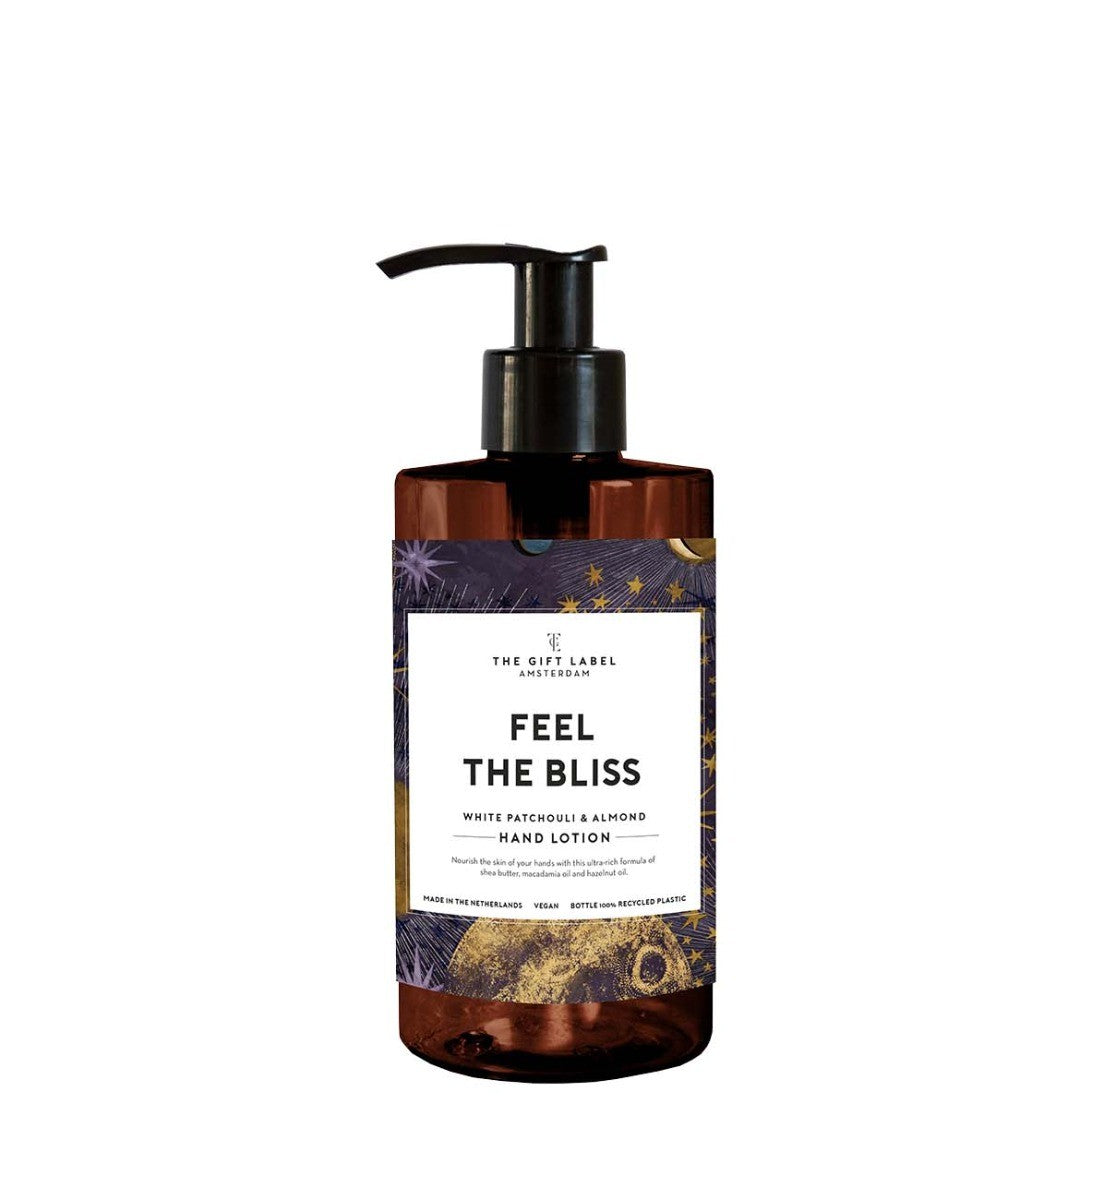 Hand Lotion - Feel The Bliss